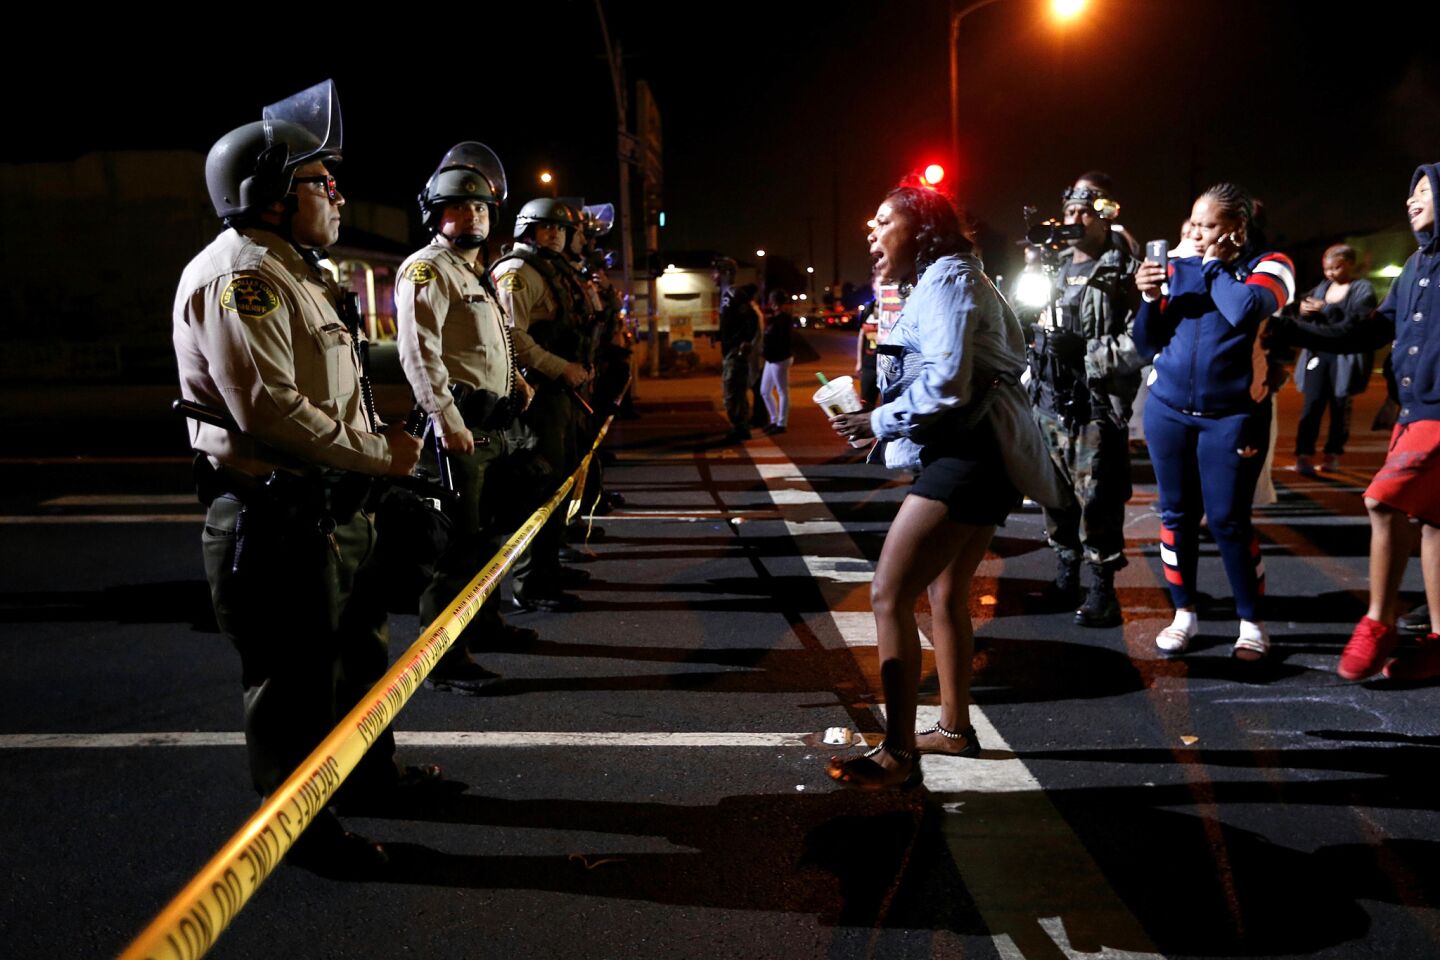 A women confronts the LA County Sheriif blocking the street after a vigil is held for Carnell Snell Jr., 18, who was fatally shot by LAPD police Saturday after a vehicle pursuit, in Los Angeles.